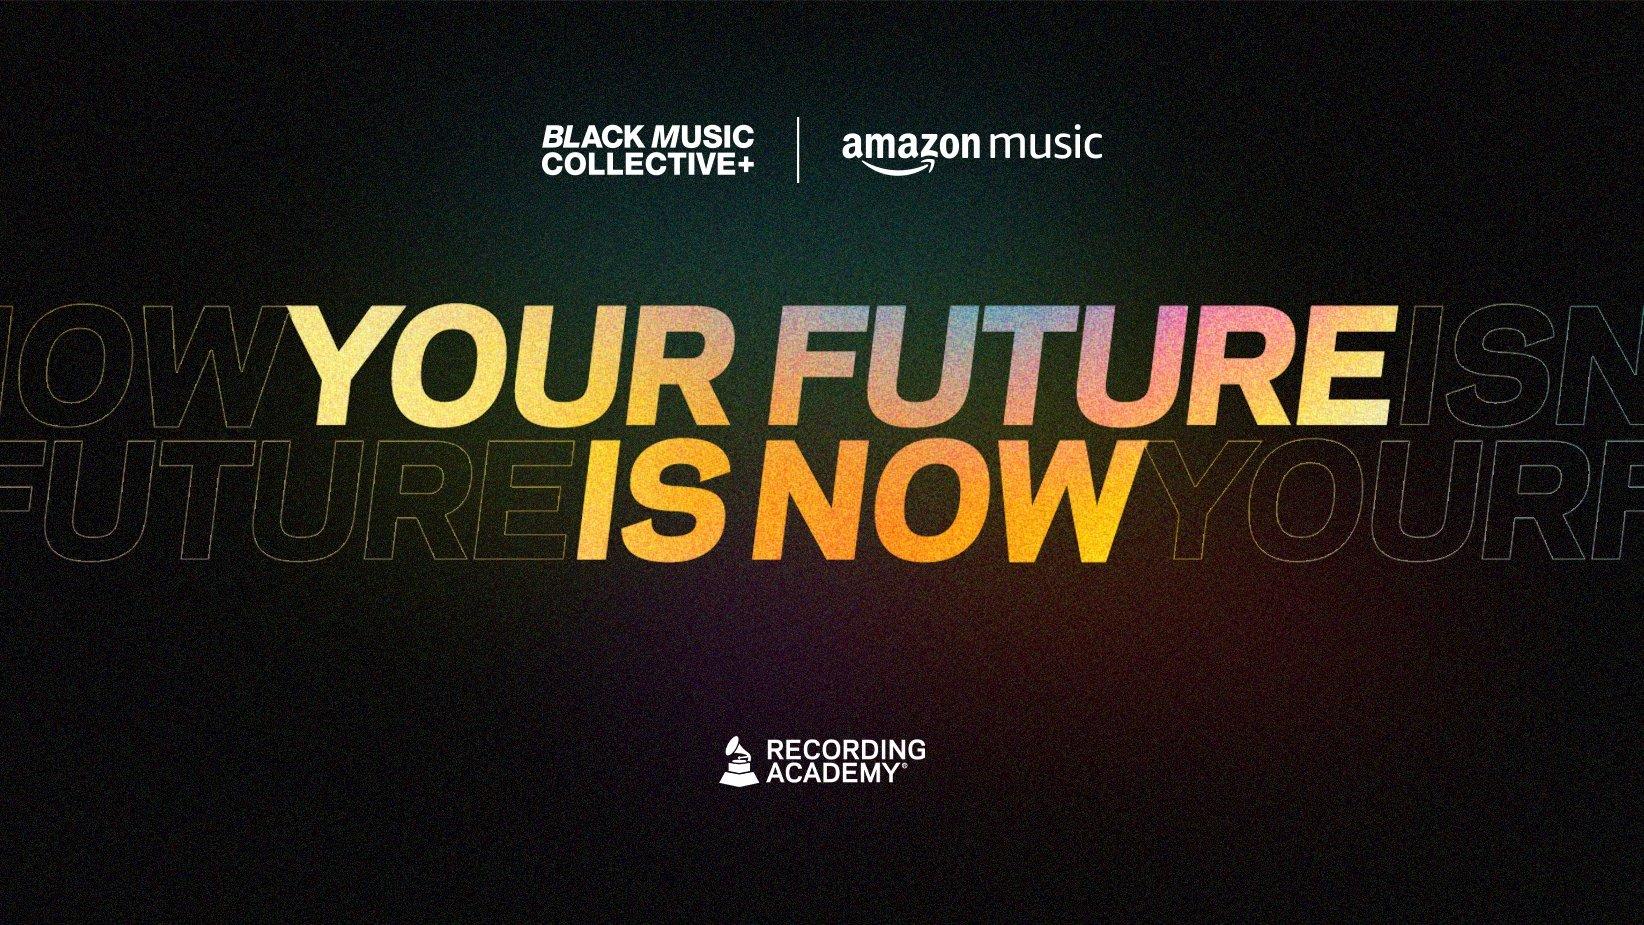 Graphic announcing the third annual "Your Future Is Now" scholarship program, presented by the Recording Academy's Black Music Collective (BMC) together with Amazon Music